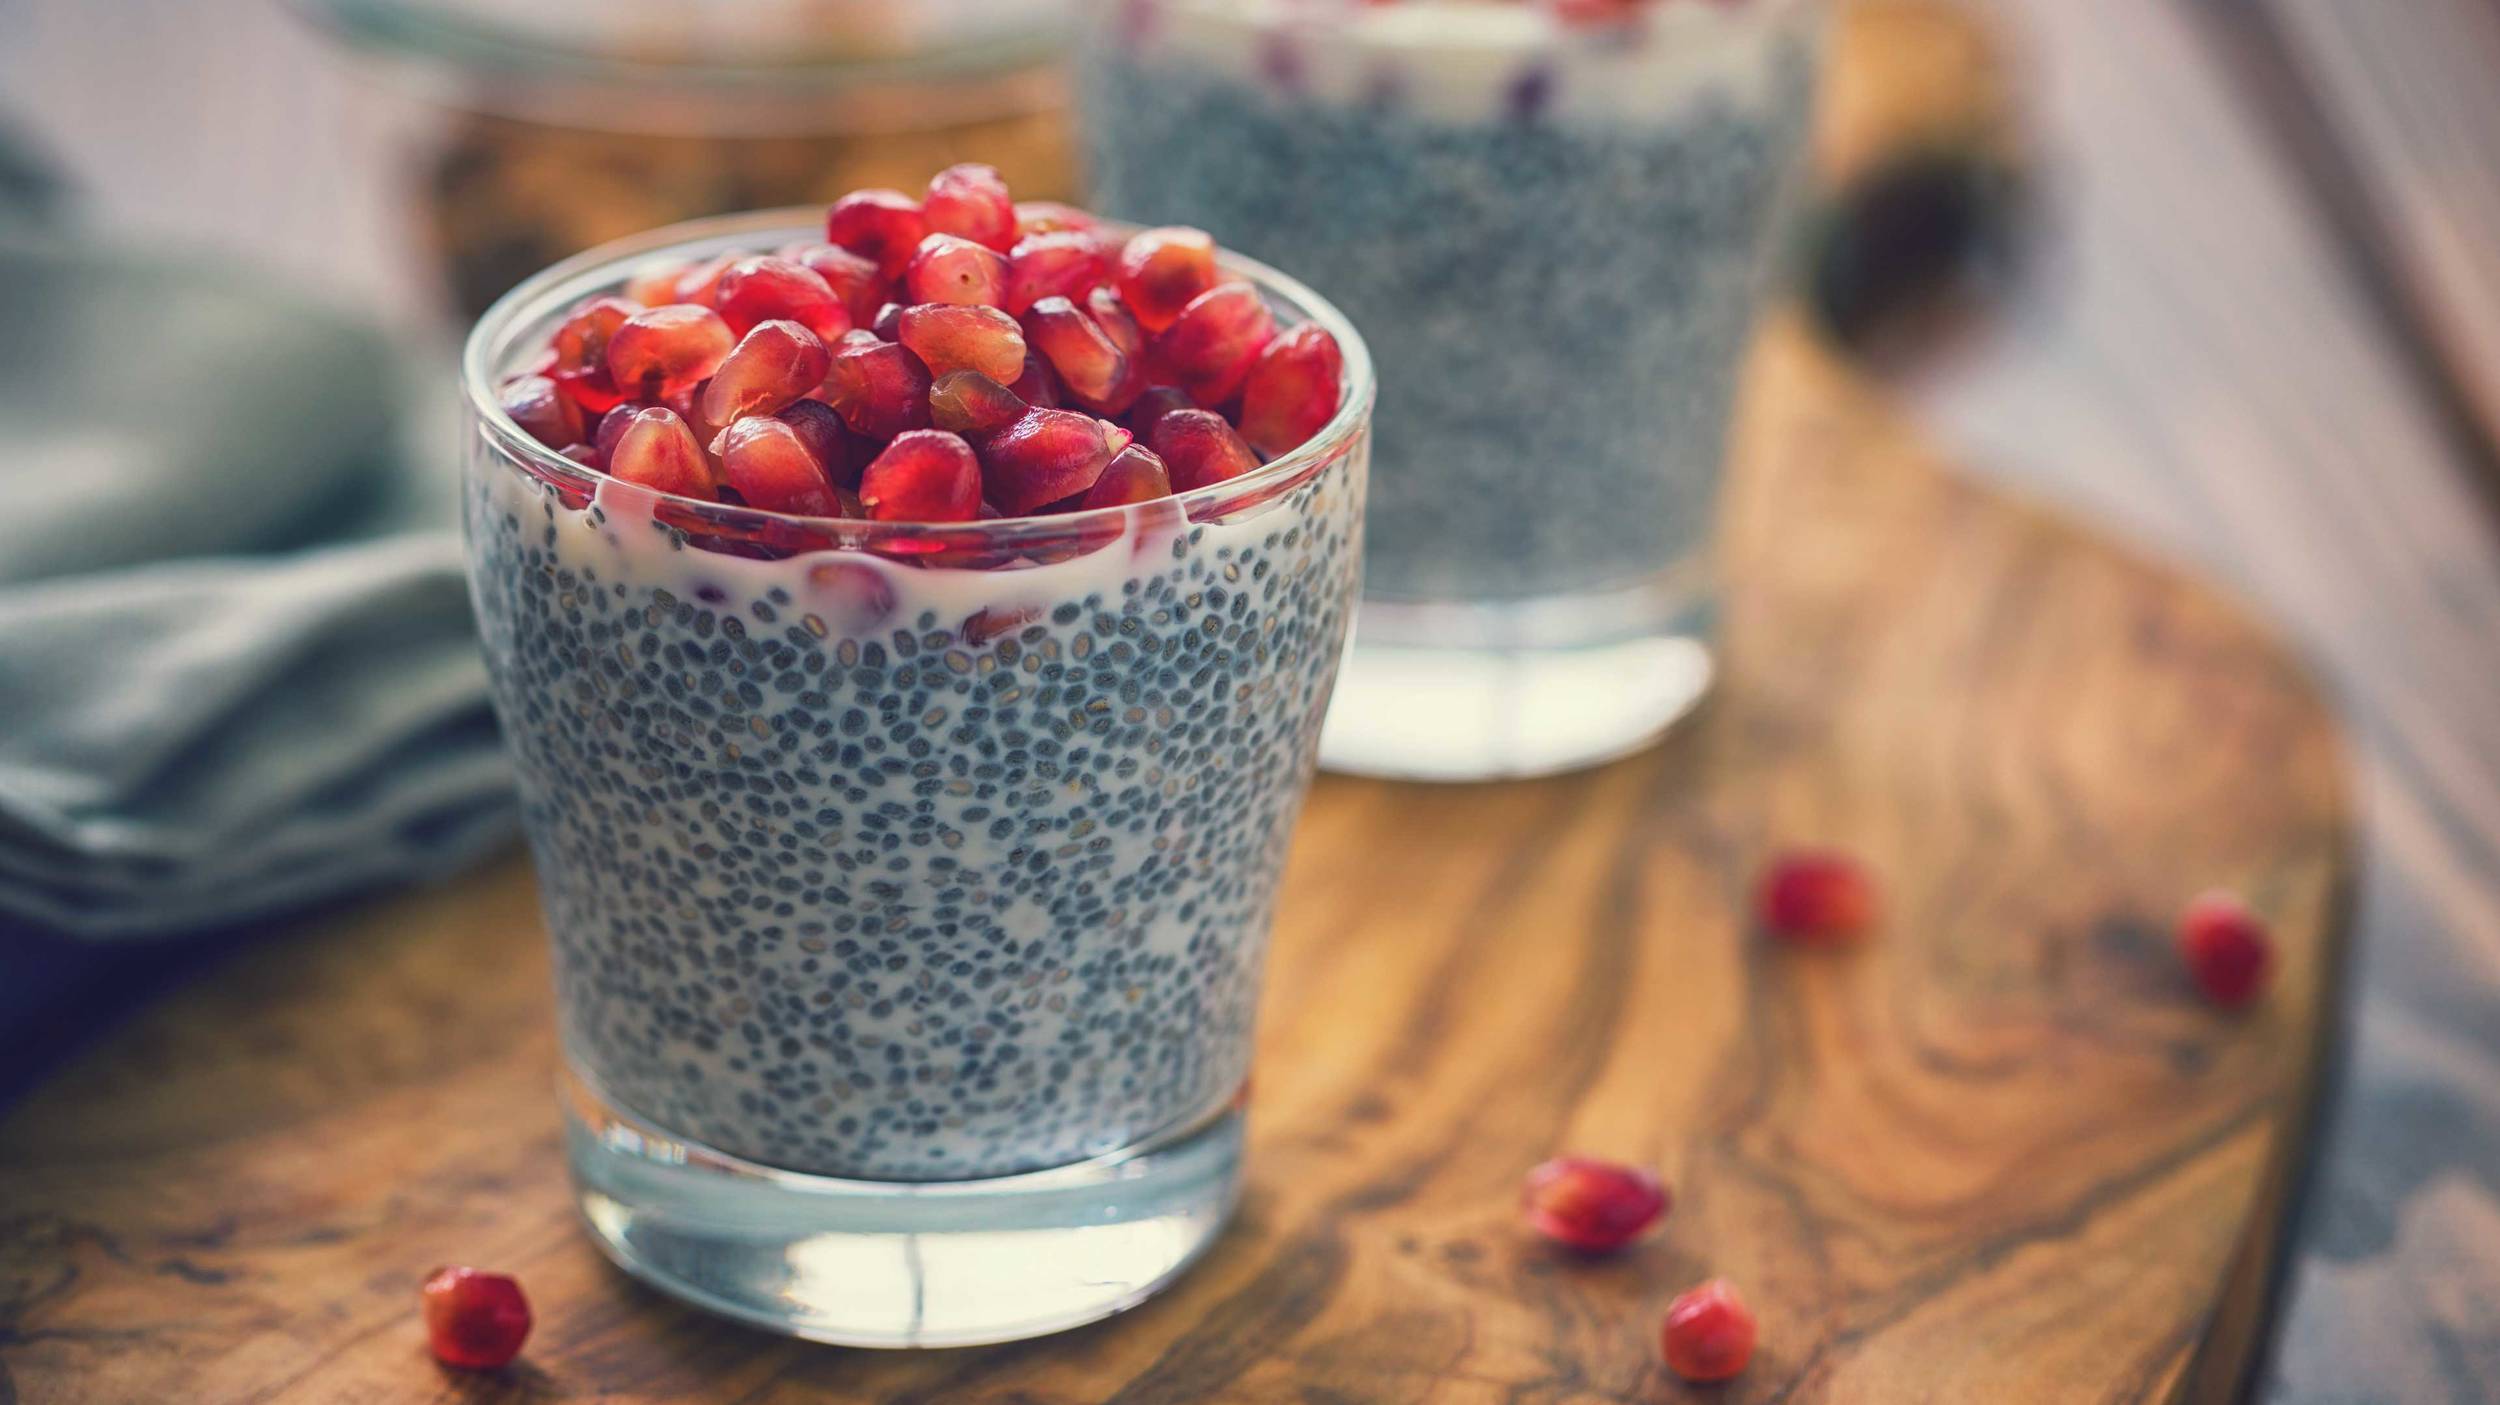 Chia seeds can be added raw to cereal, yoghurt, salads, soups, puddings, juices and smoothies.